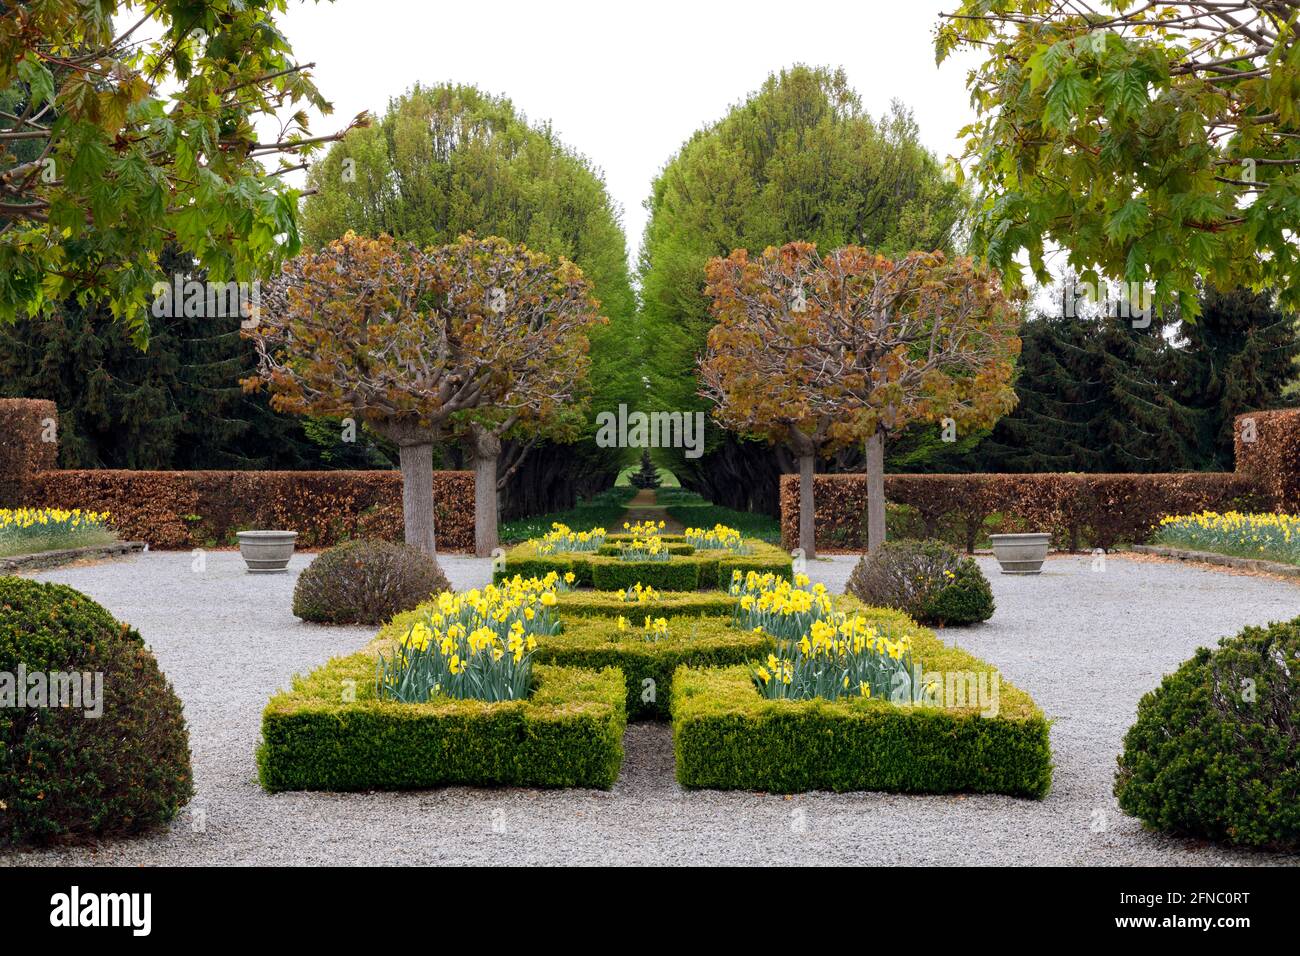 Canada, Ontario, Niagara Falls, School of Horticulture.   Mediterranean Parterre Garden, planted with daffodils in the spring. Stock Photo